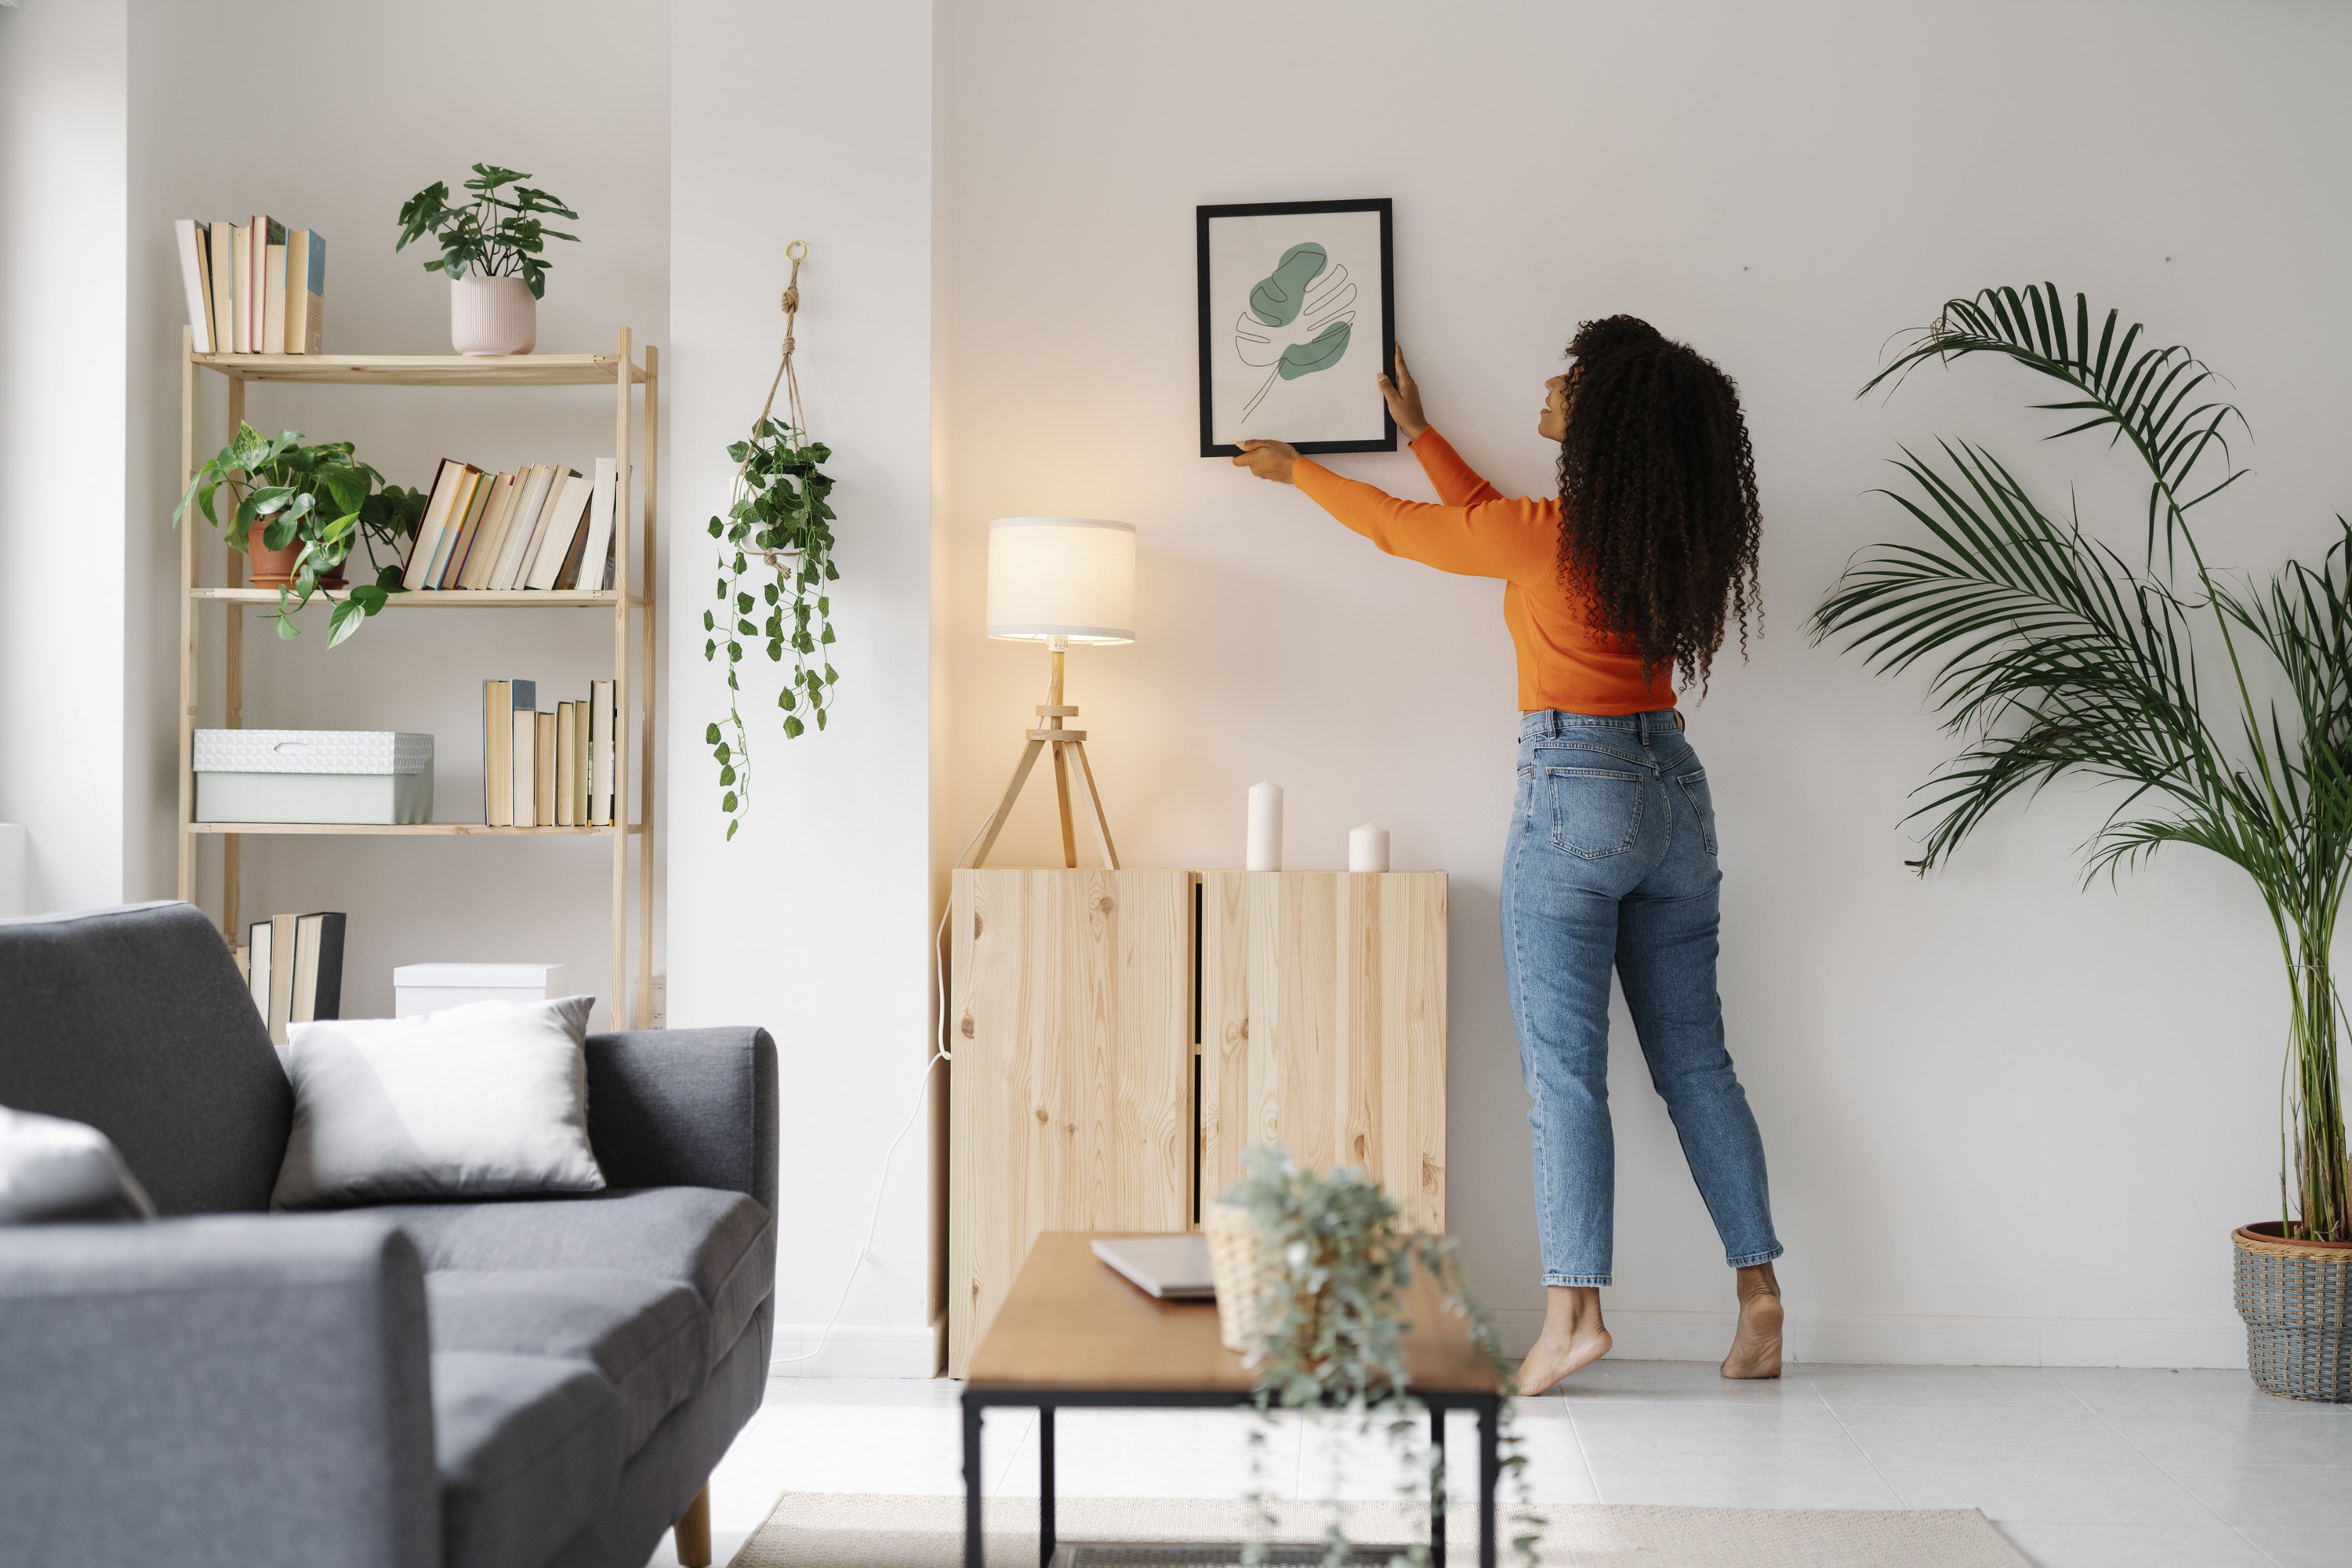 A woman hanging a framed picture